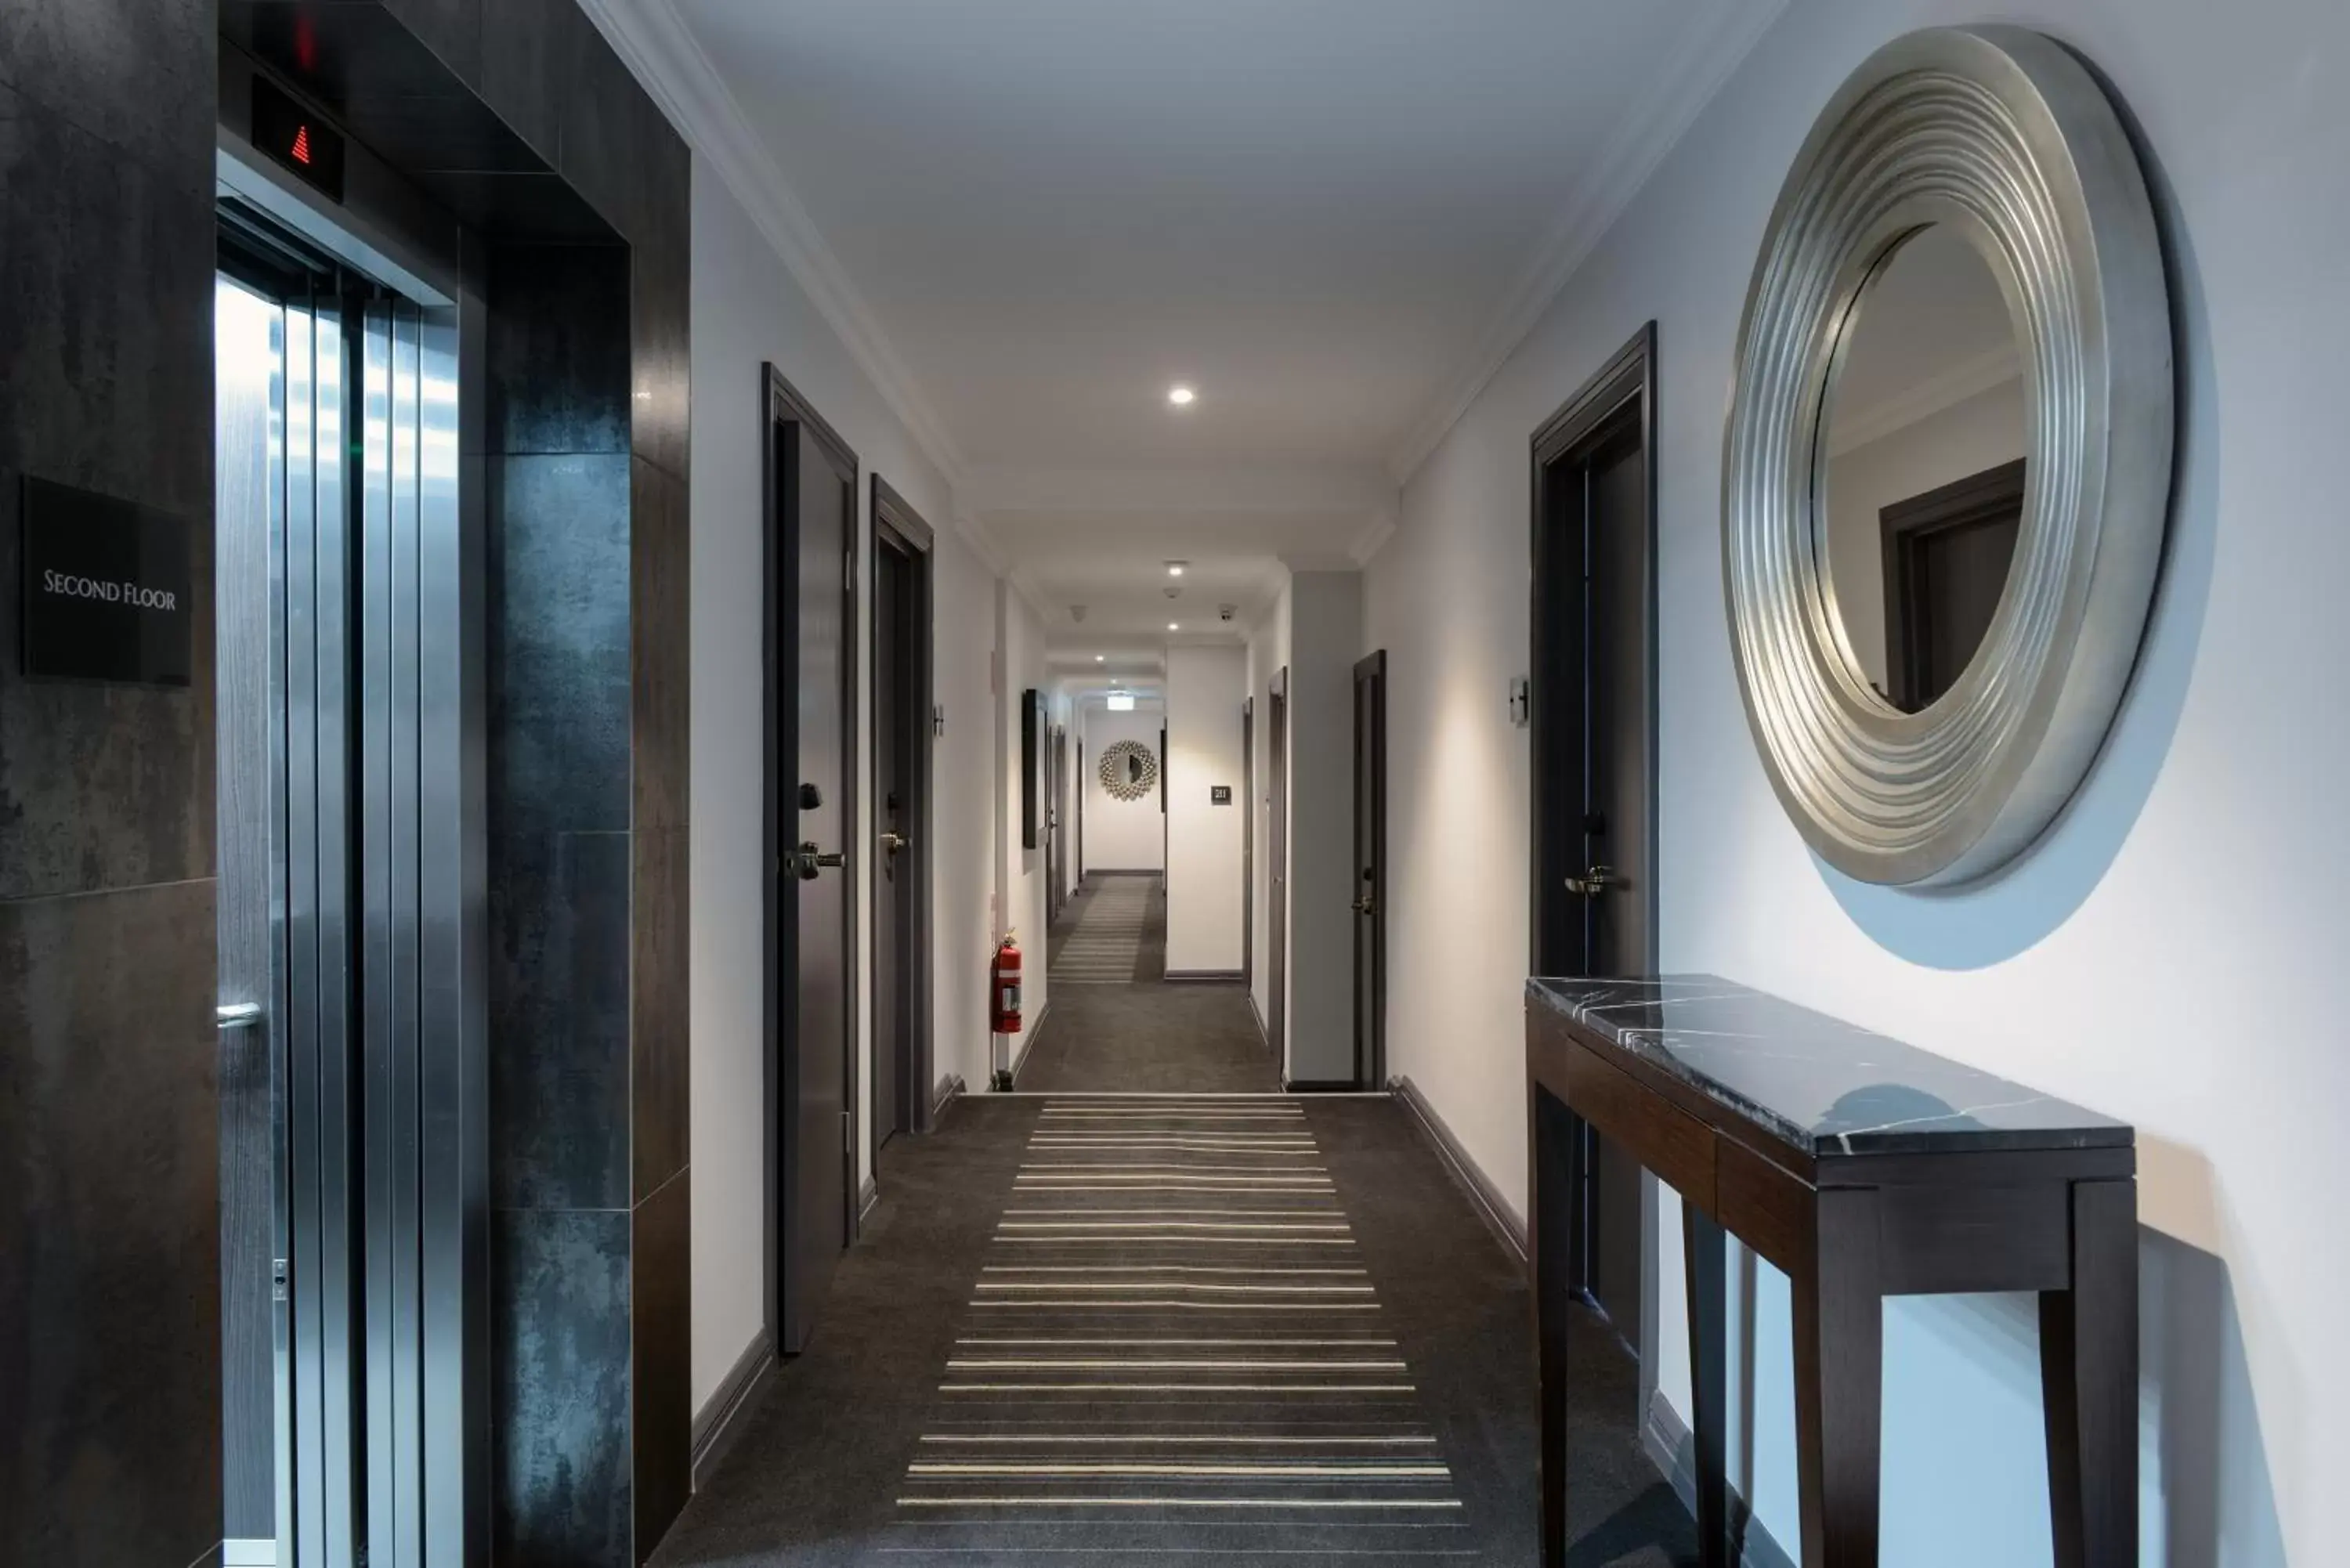 Property building in Perouse Randwick by Sydney Lodges